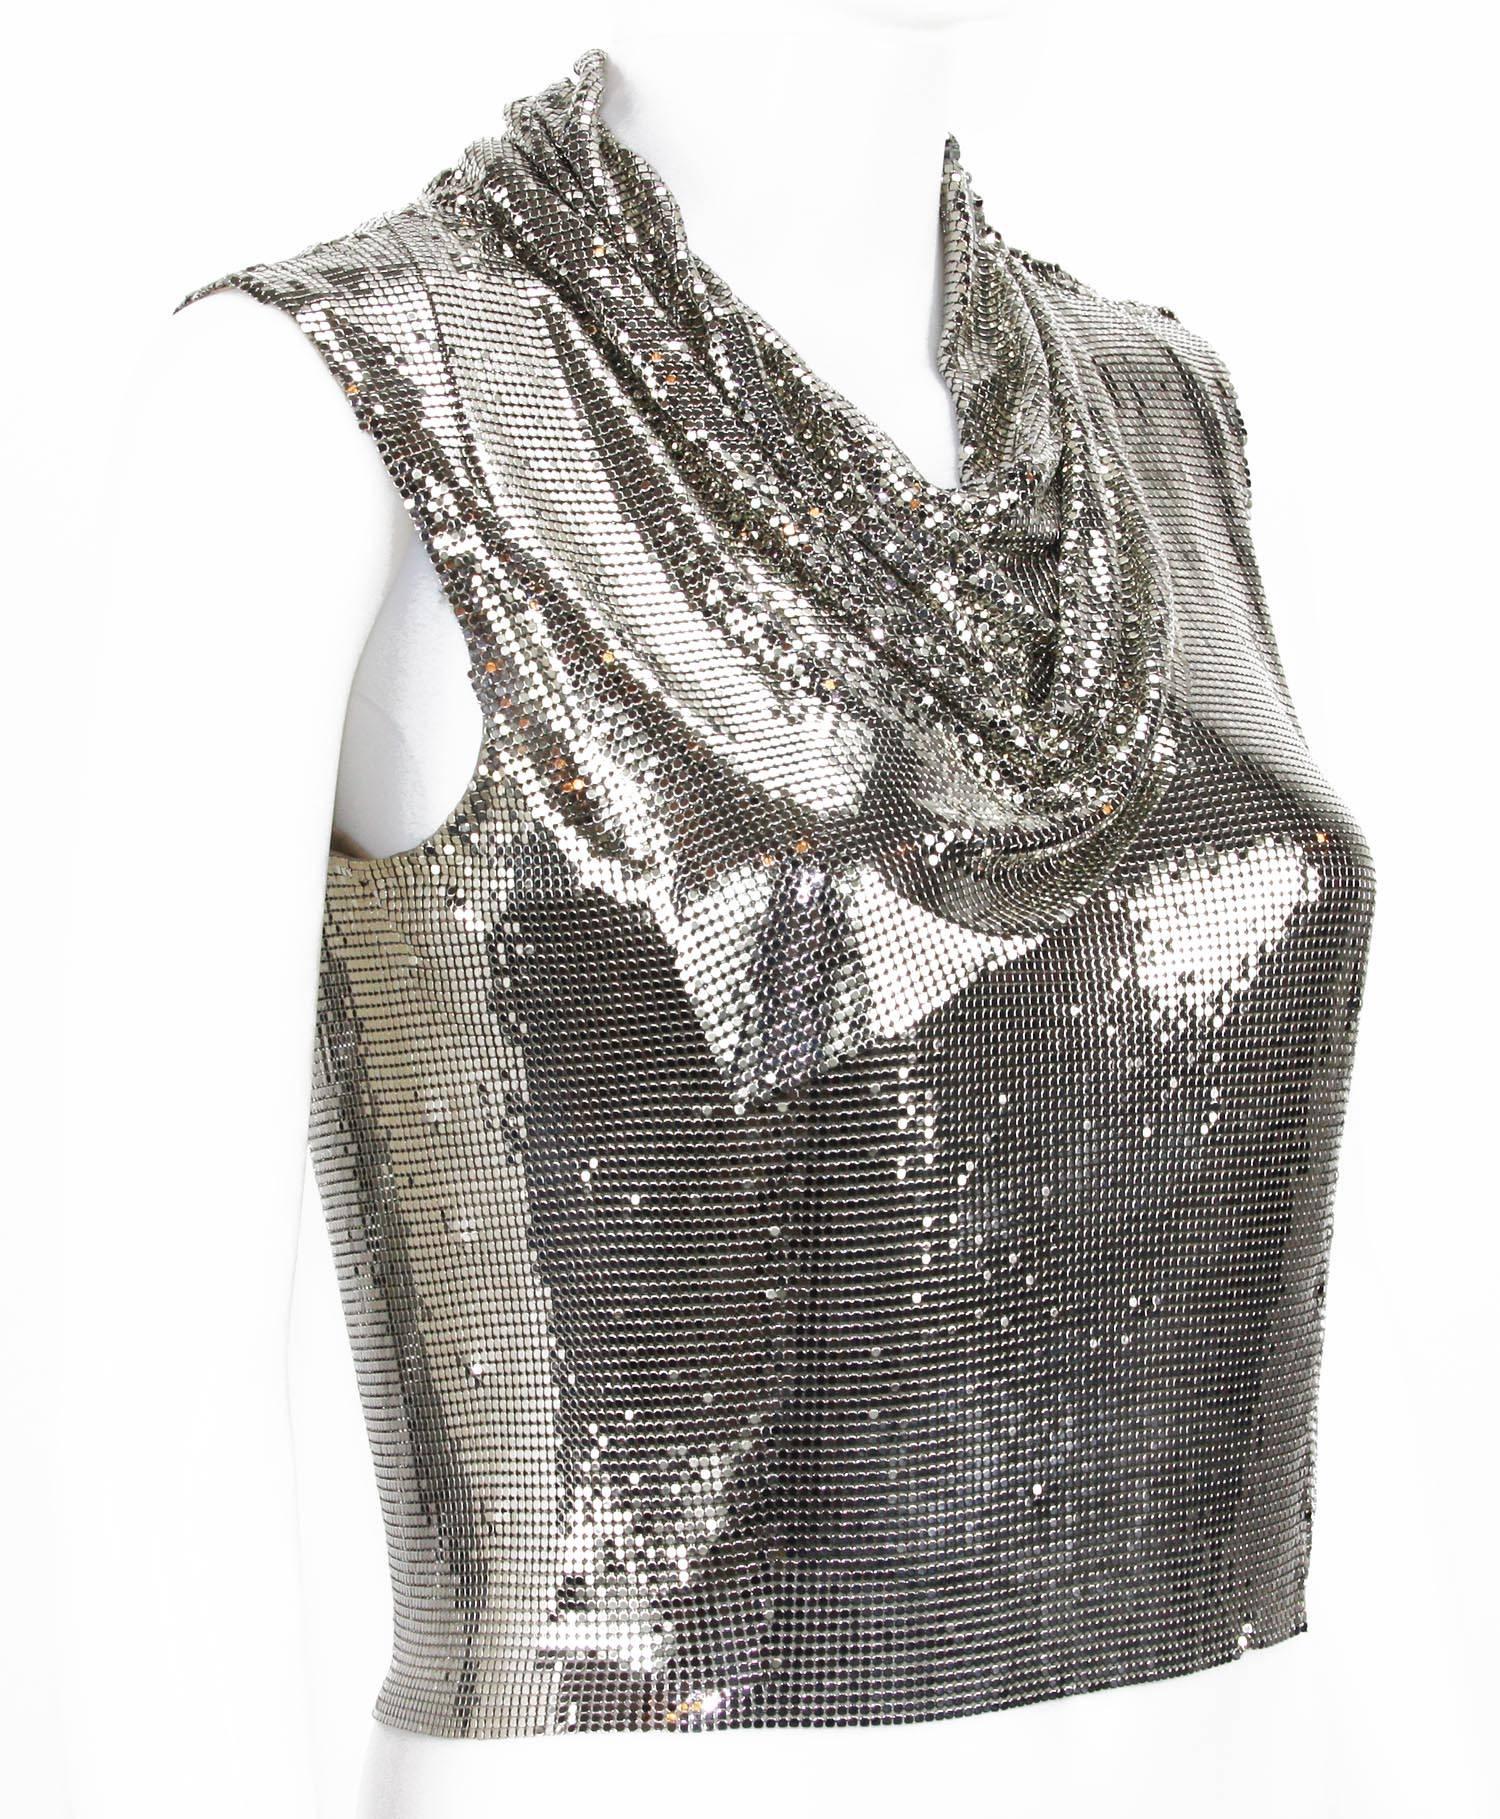 Gianni Versace Couture Iconic from 90's Metallic Mesh
Italian size 38
Silver-tone Metallic Mesh
This top has a matching draping metal scarf that is permanently attached around the neck line that has a special look and unique design.
Two Zipper